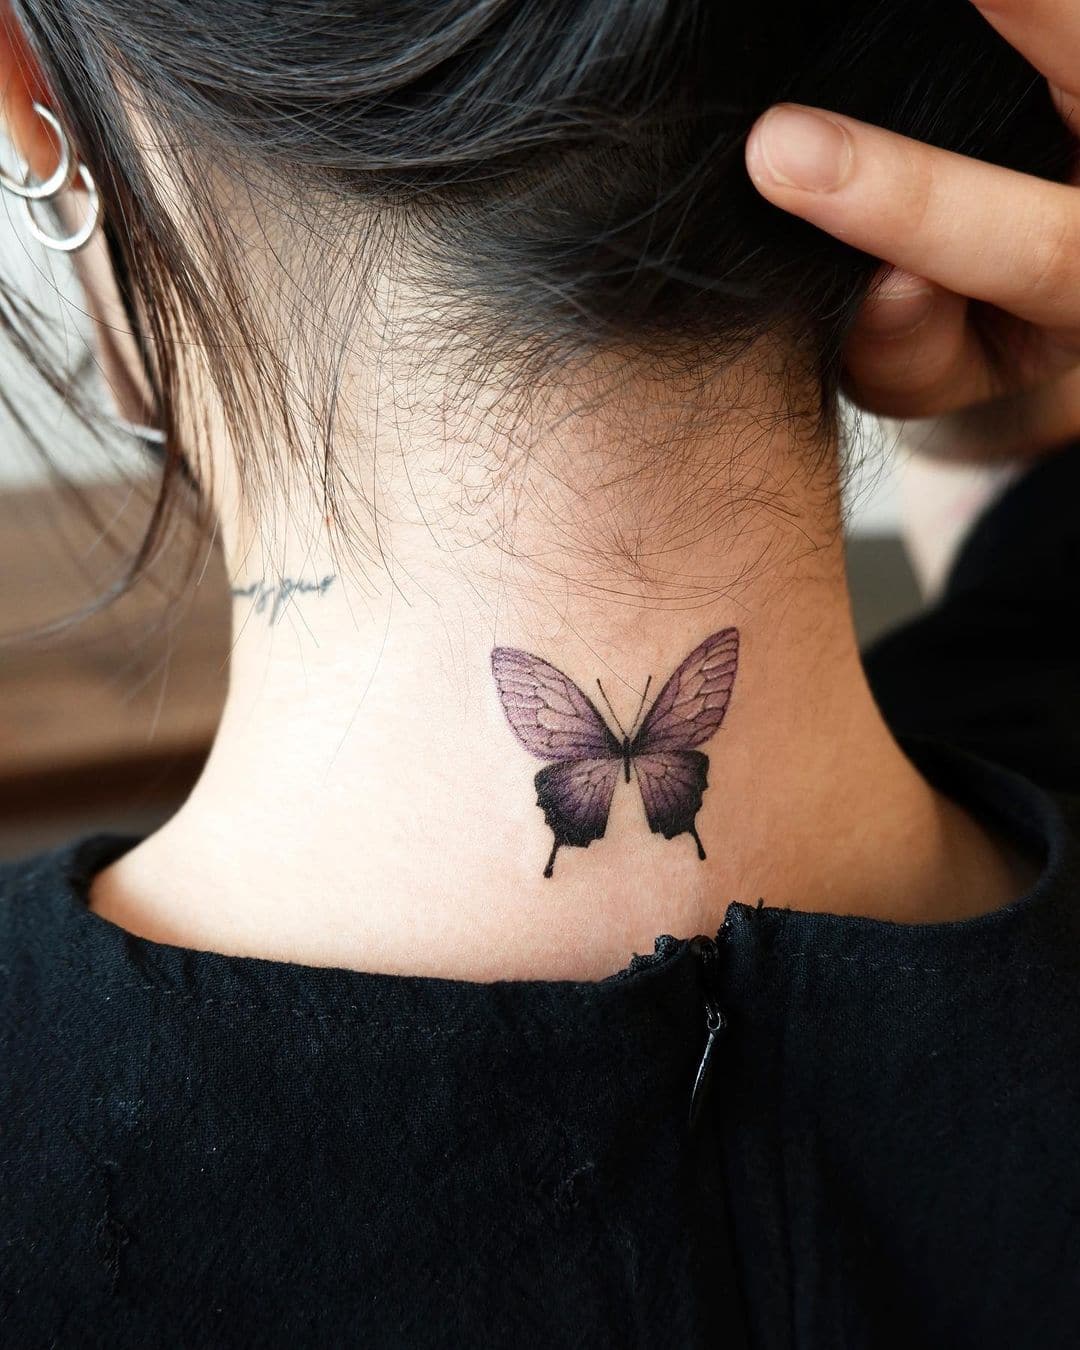 Tasteful Tattoos on Your Face, Neck, Head, or Ears - HubPages